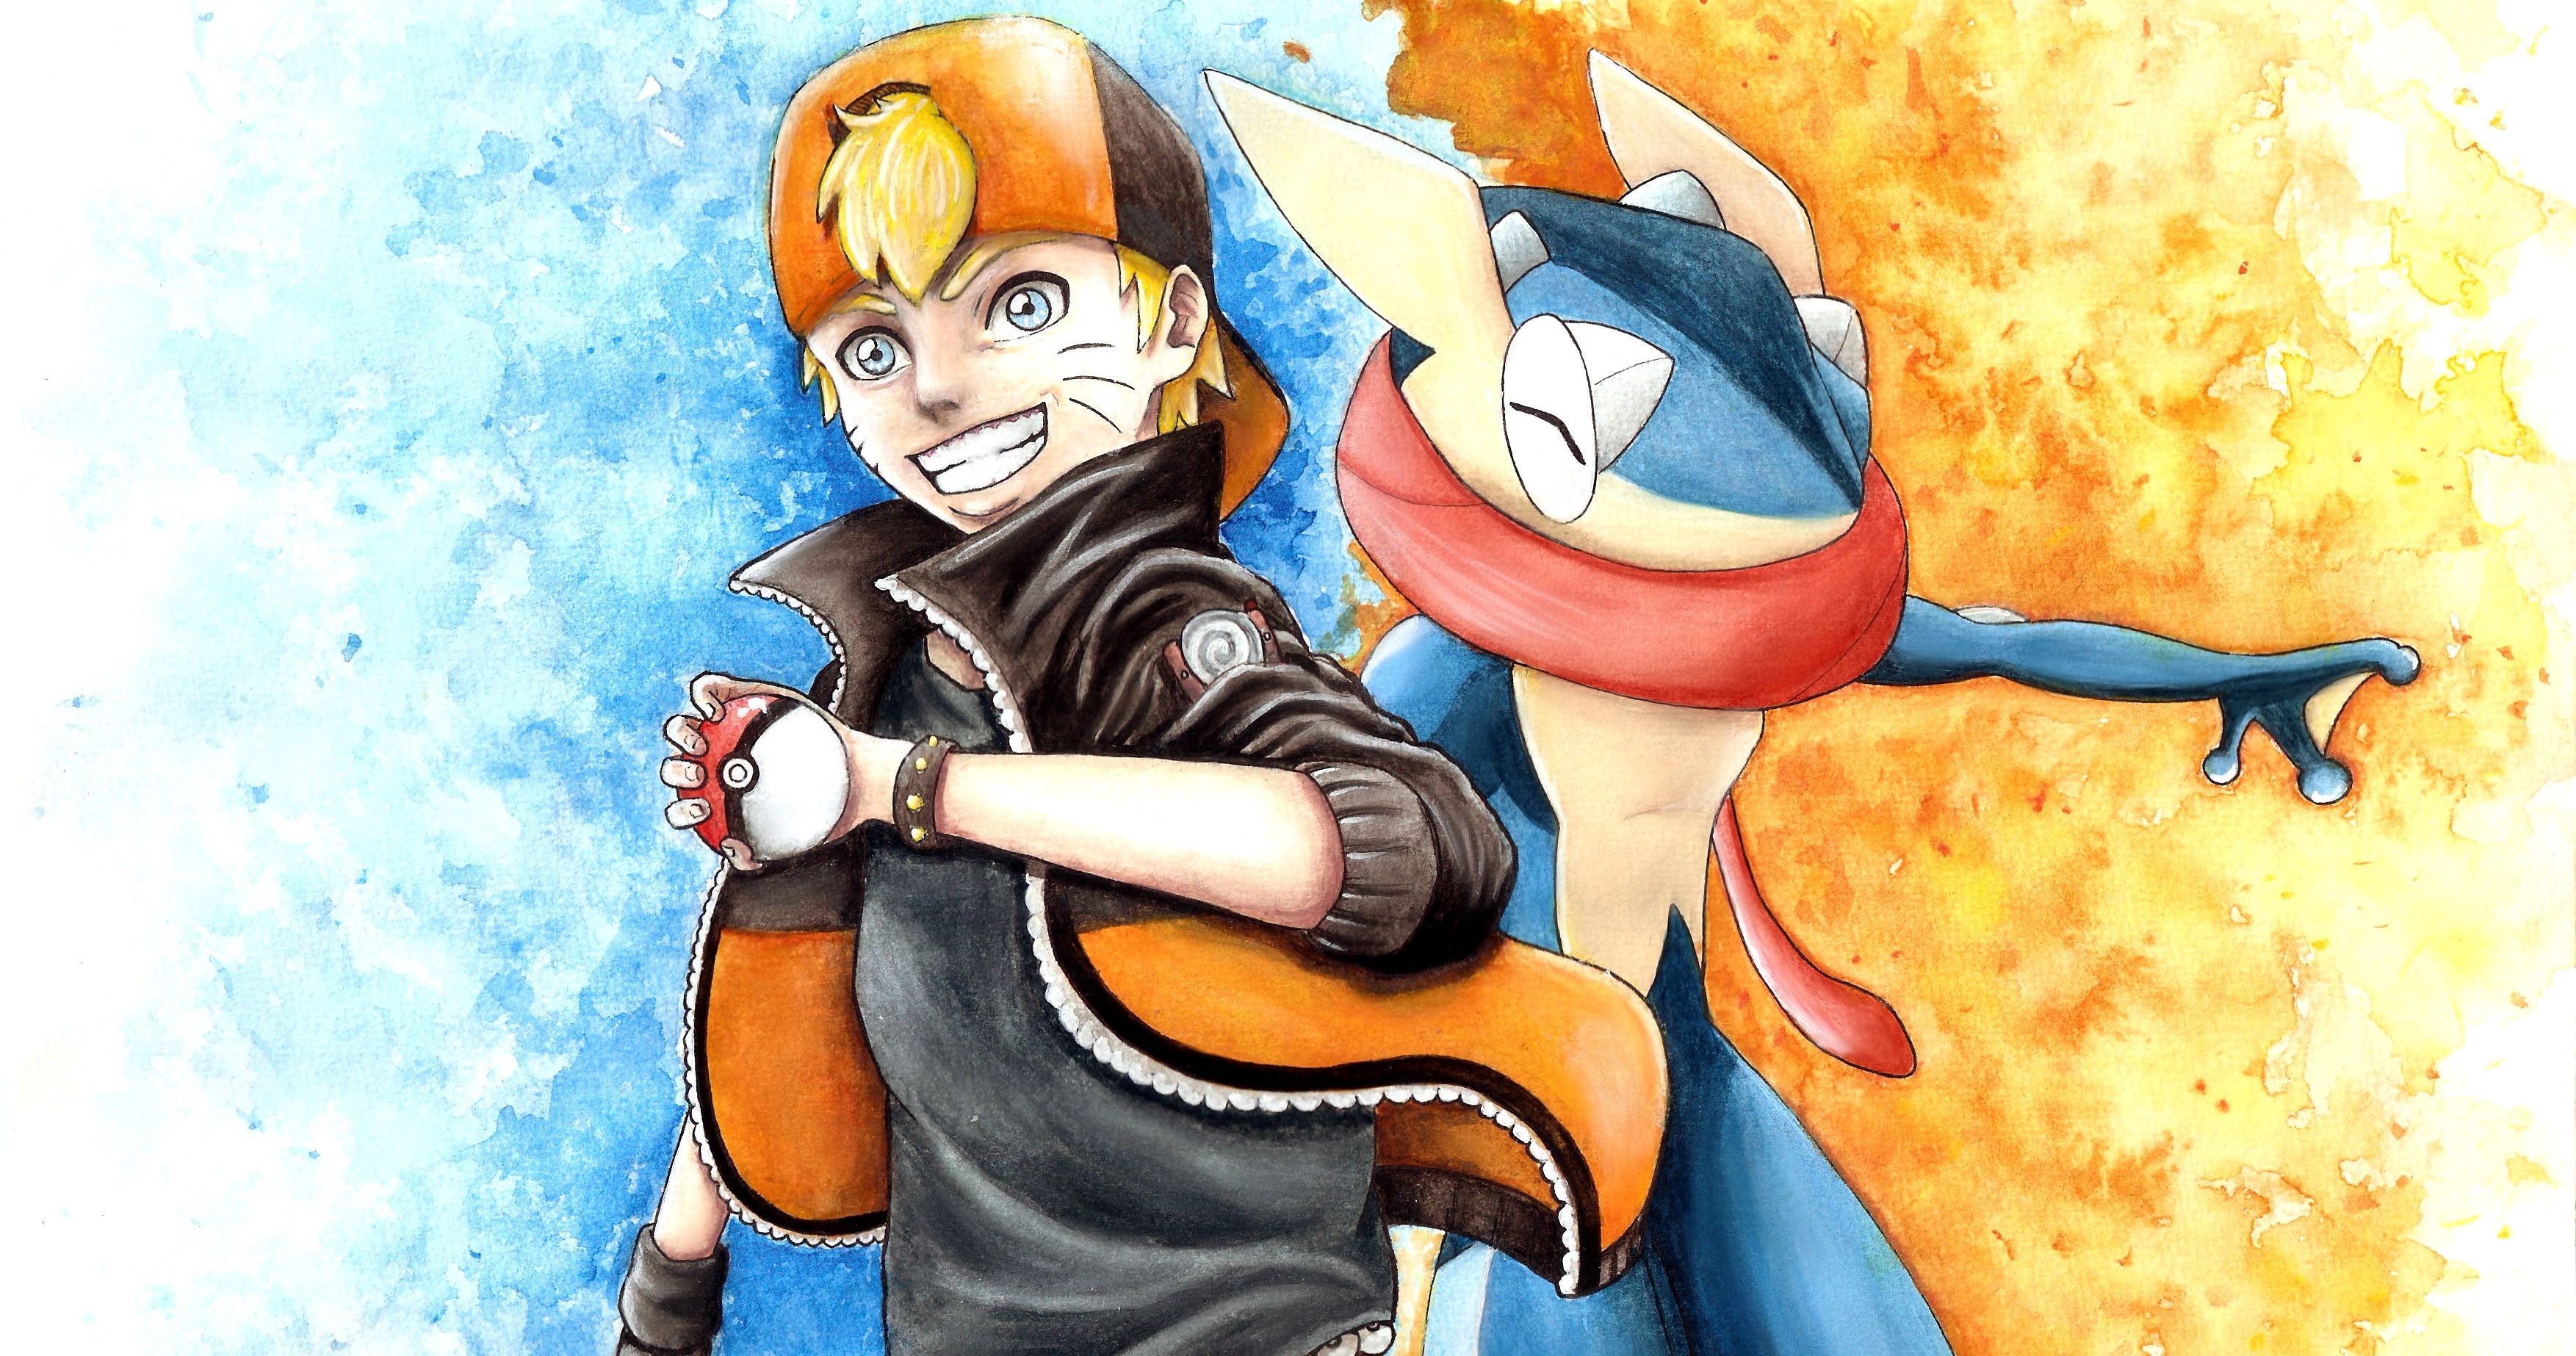 naruto characters as pokemon trainers